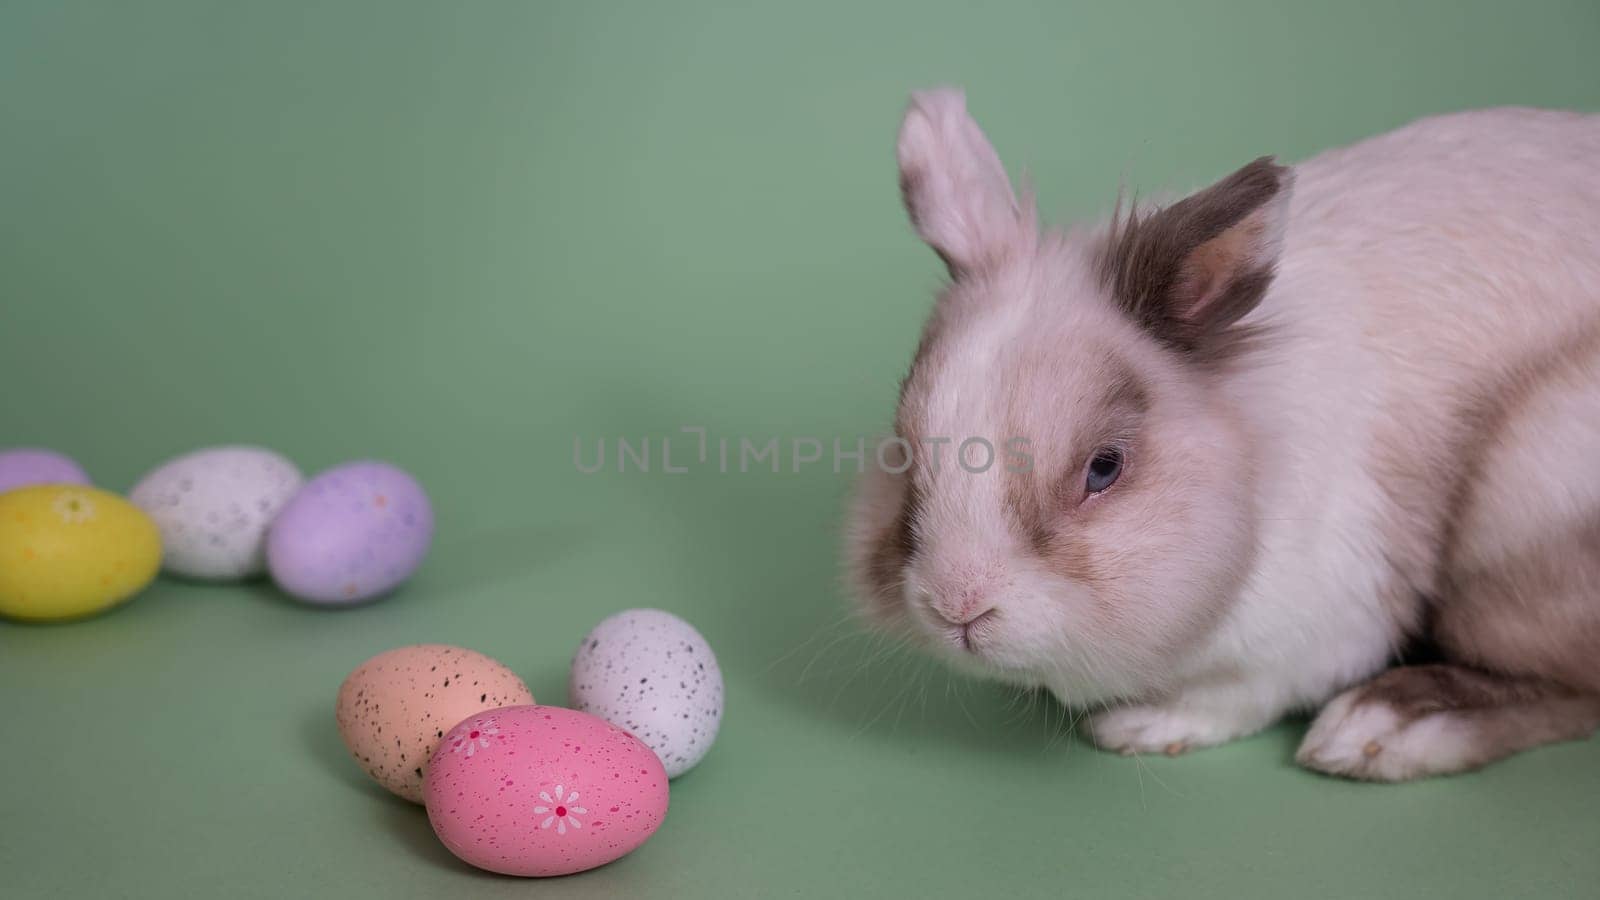 Easter Bunny on a green background with colorful painted eggs. by mrwed54